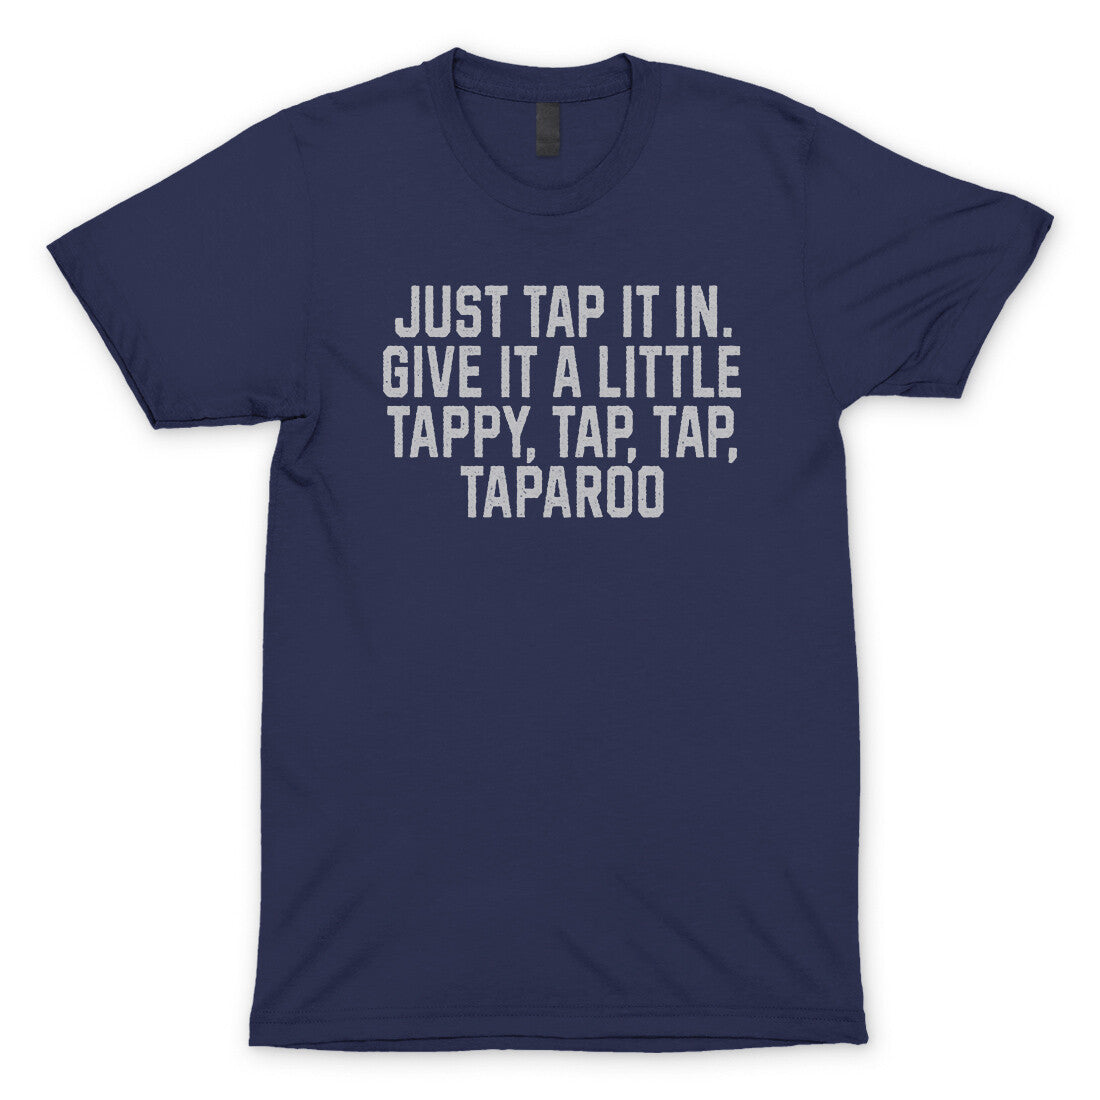 Just Tap it in Give it a Little Tappy Tap Tap Taparoo in Navy Color